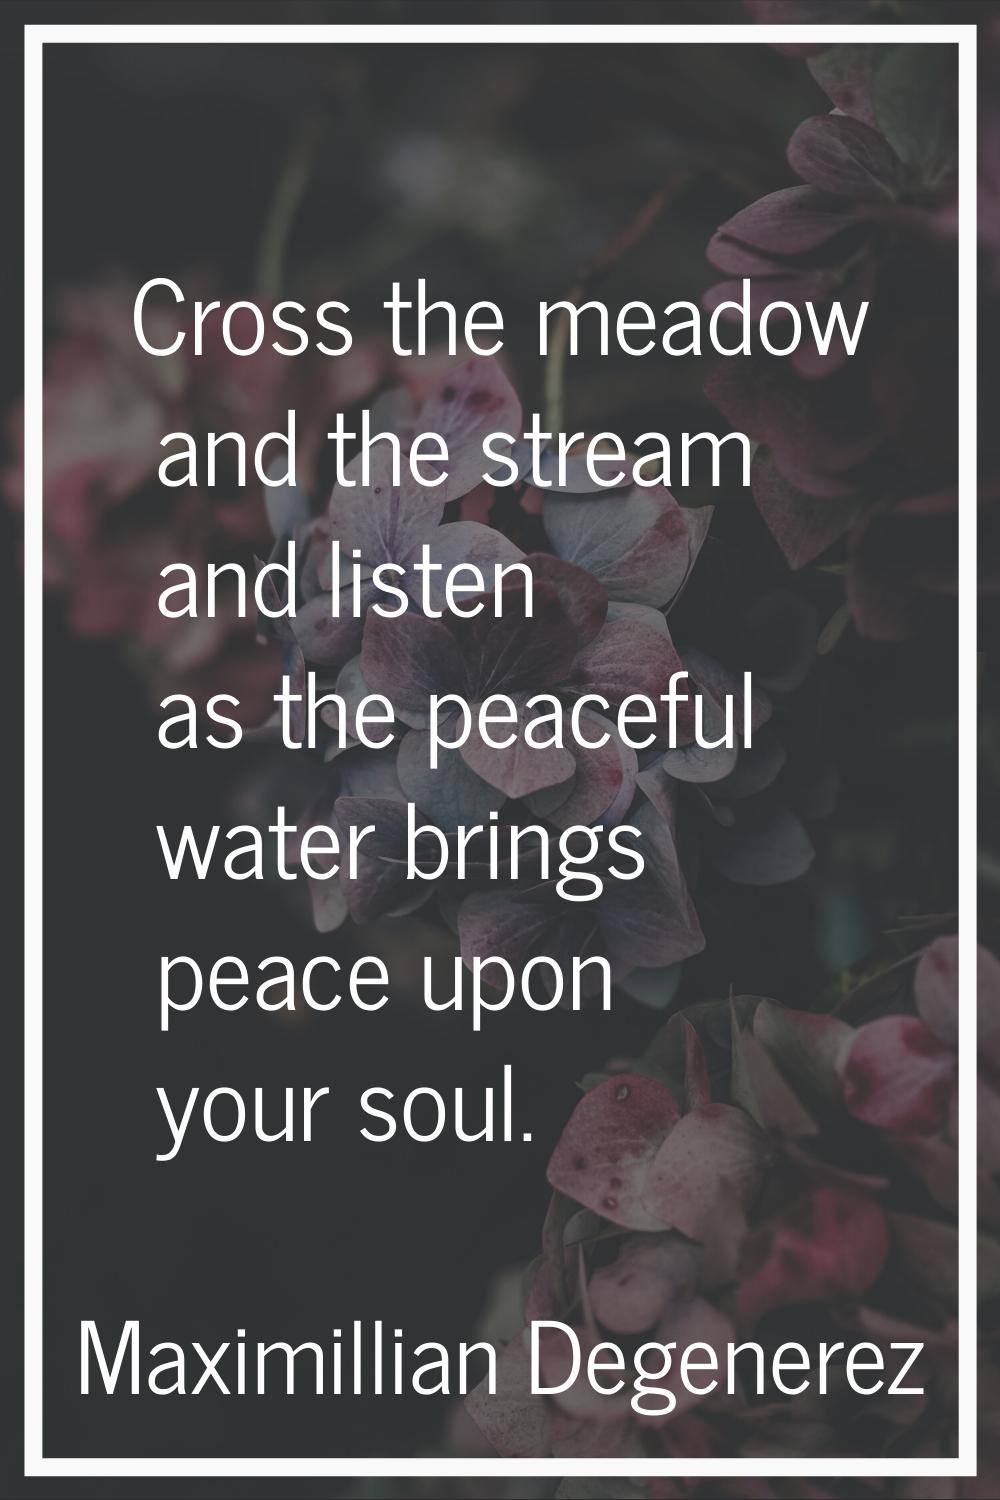 Cross the meadow and the stream and listen as the peaceful water brings peace upon your soul.